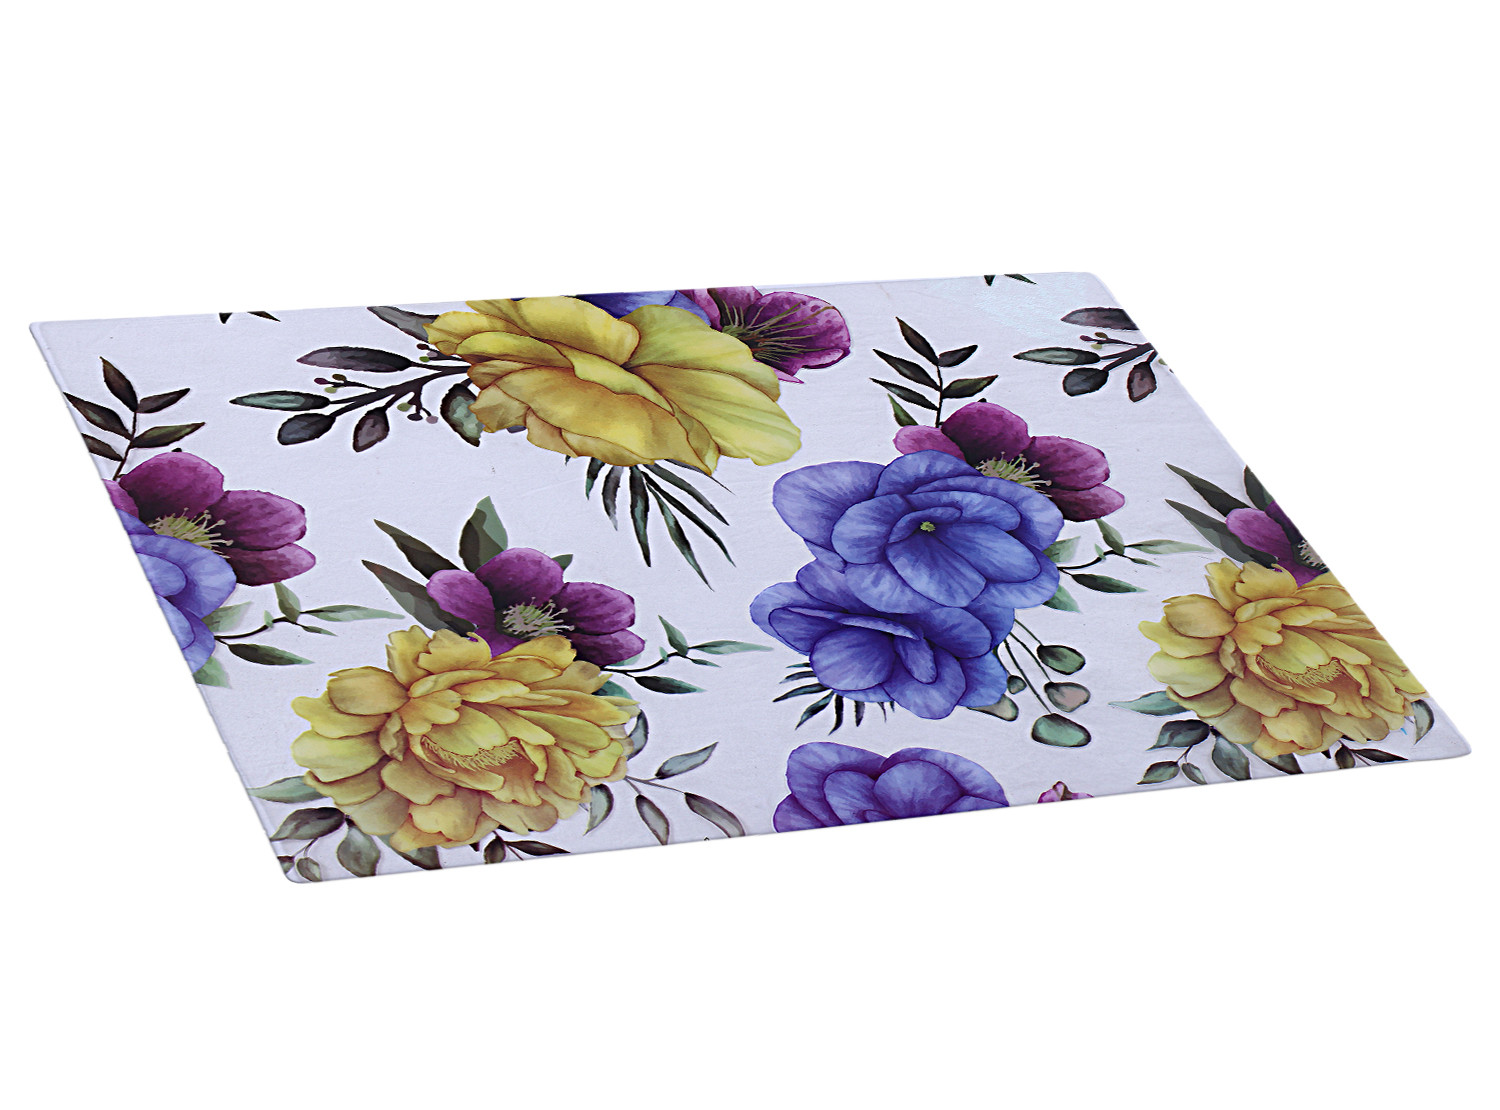 Kuber Industries Floral Print PVC Waterproof & Washable Refrigerator|Fridge Placemats For Home & Kitchen Set of 6 (Transparent)